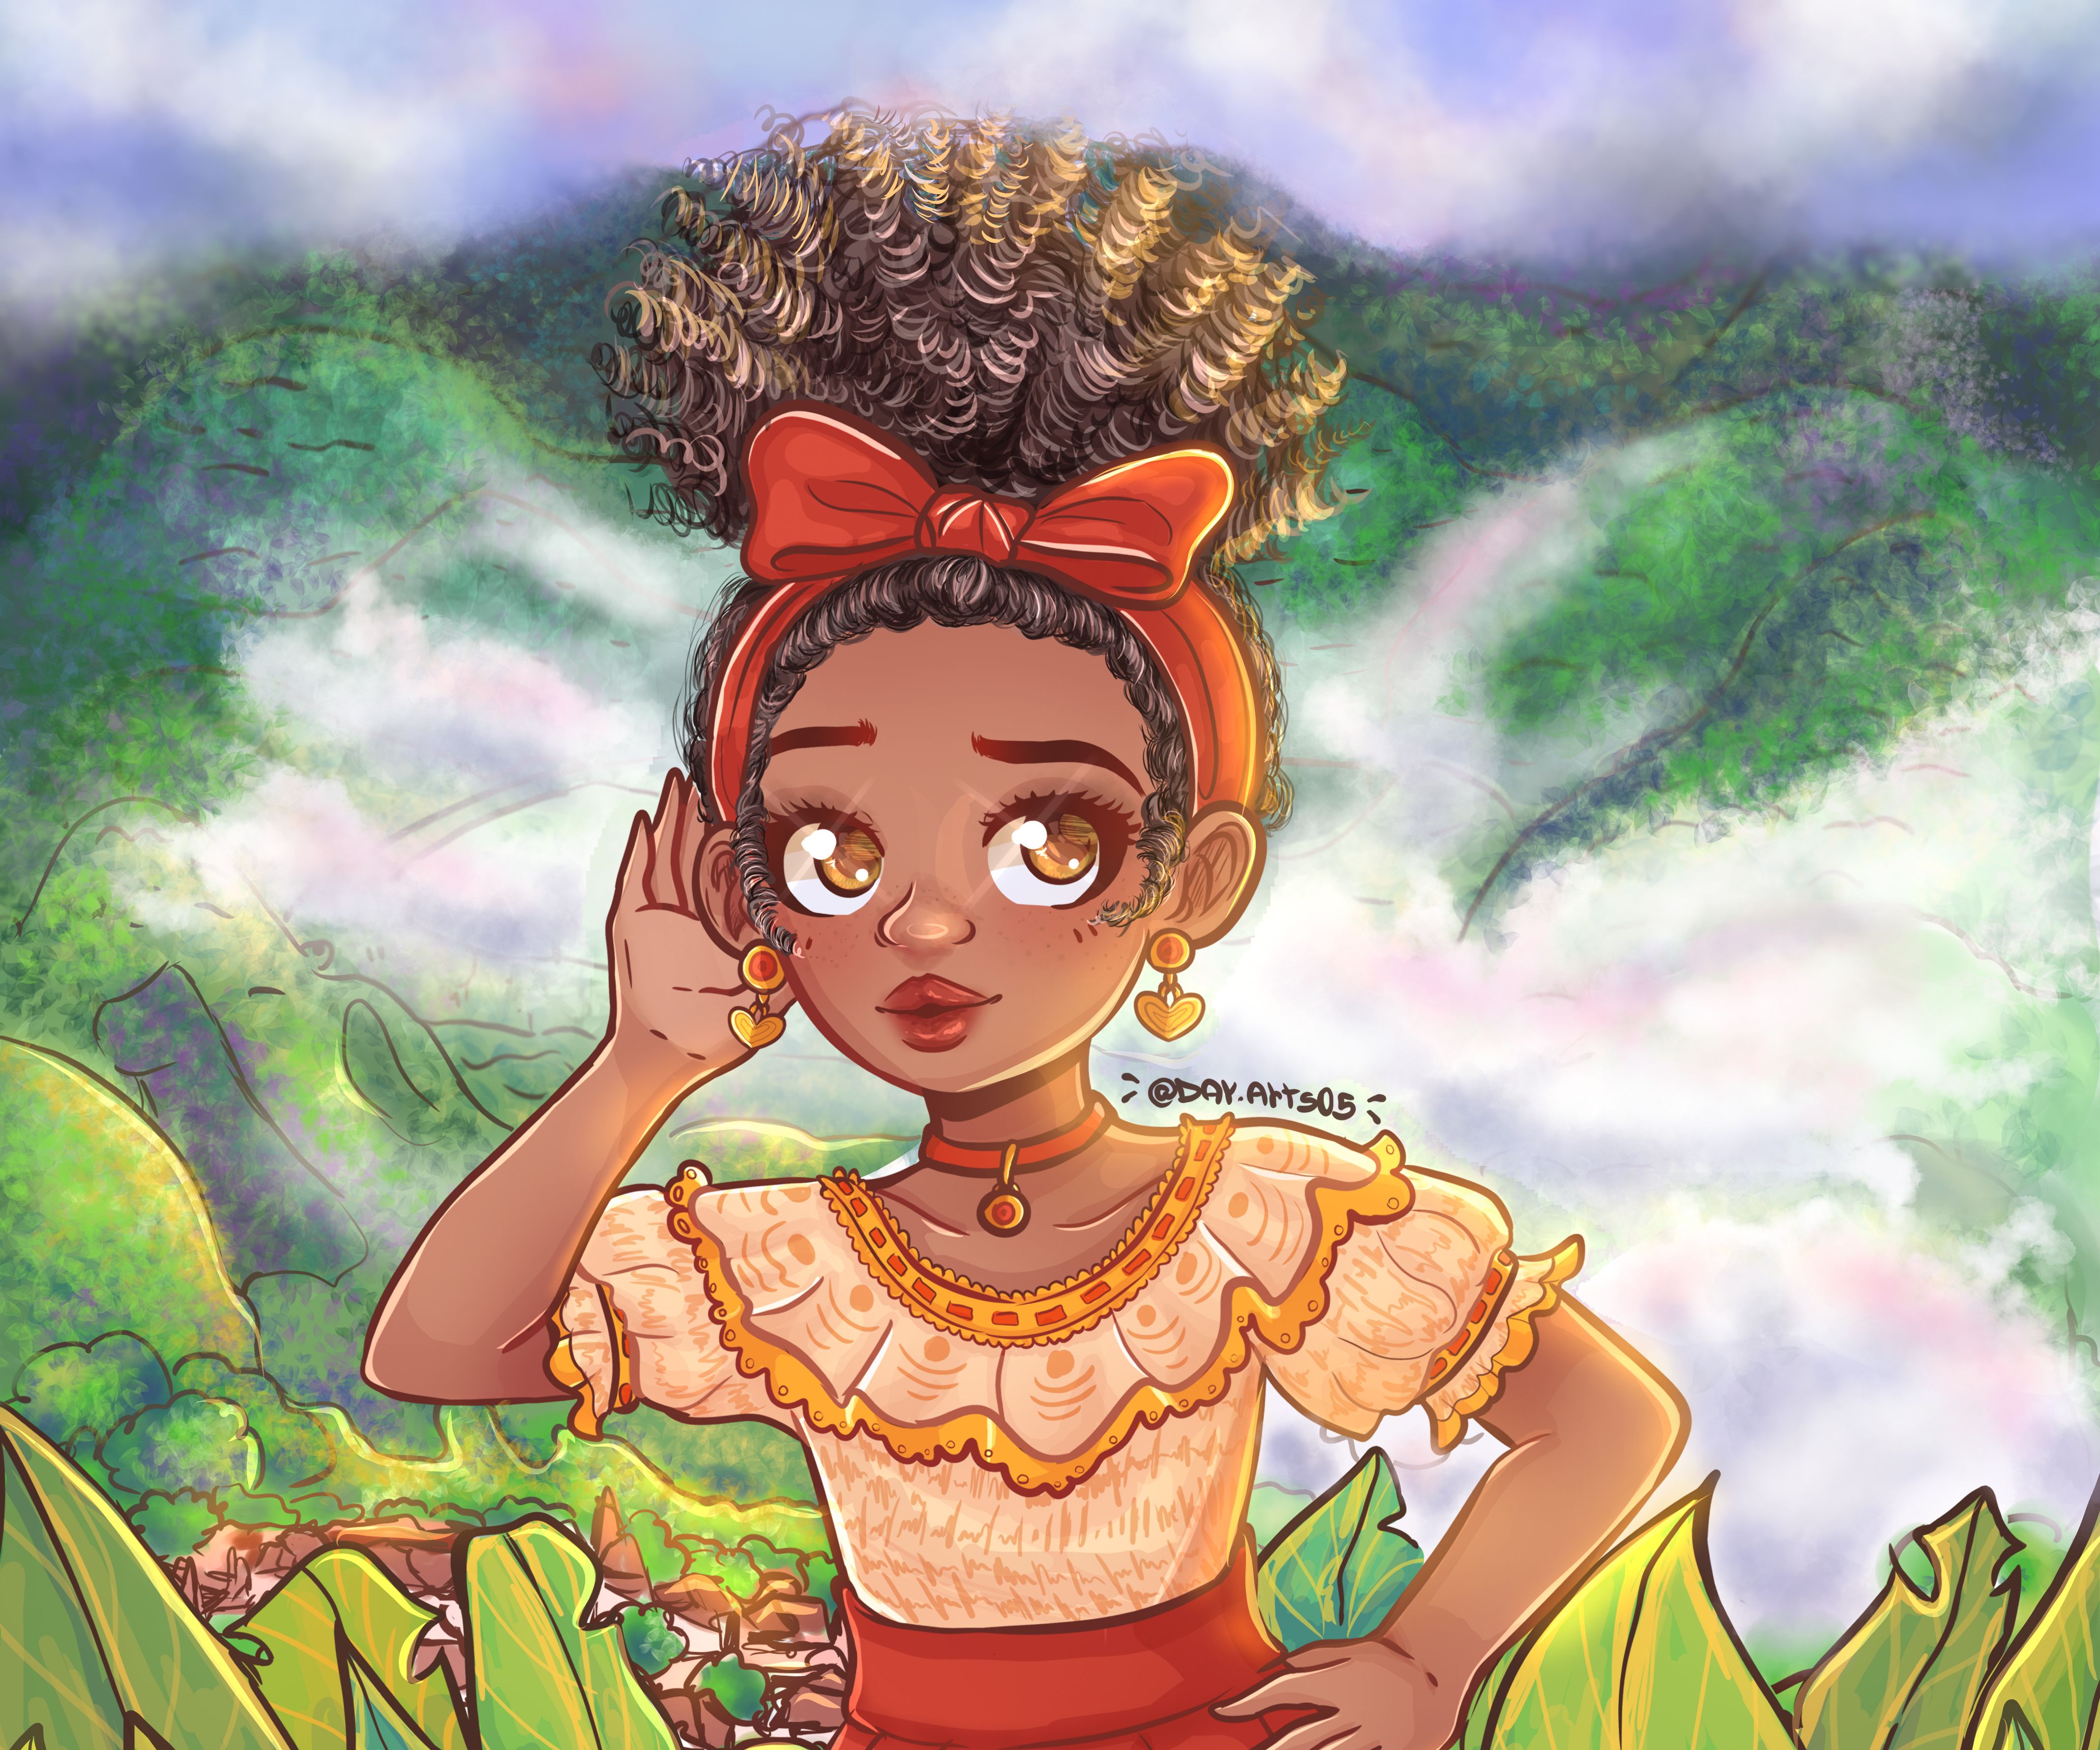 Digital art of a young Black girl with curly hair, wearing a yellow top and red skirt, standing in a lush green forest. - Encanto